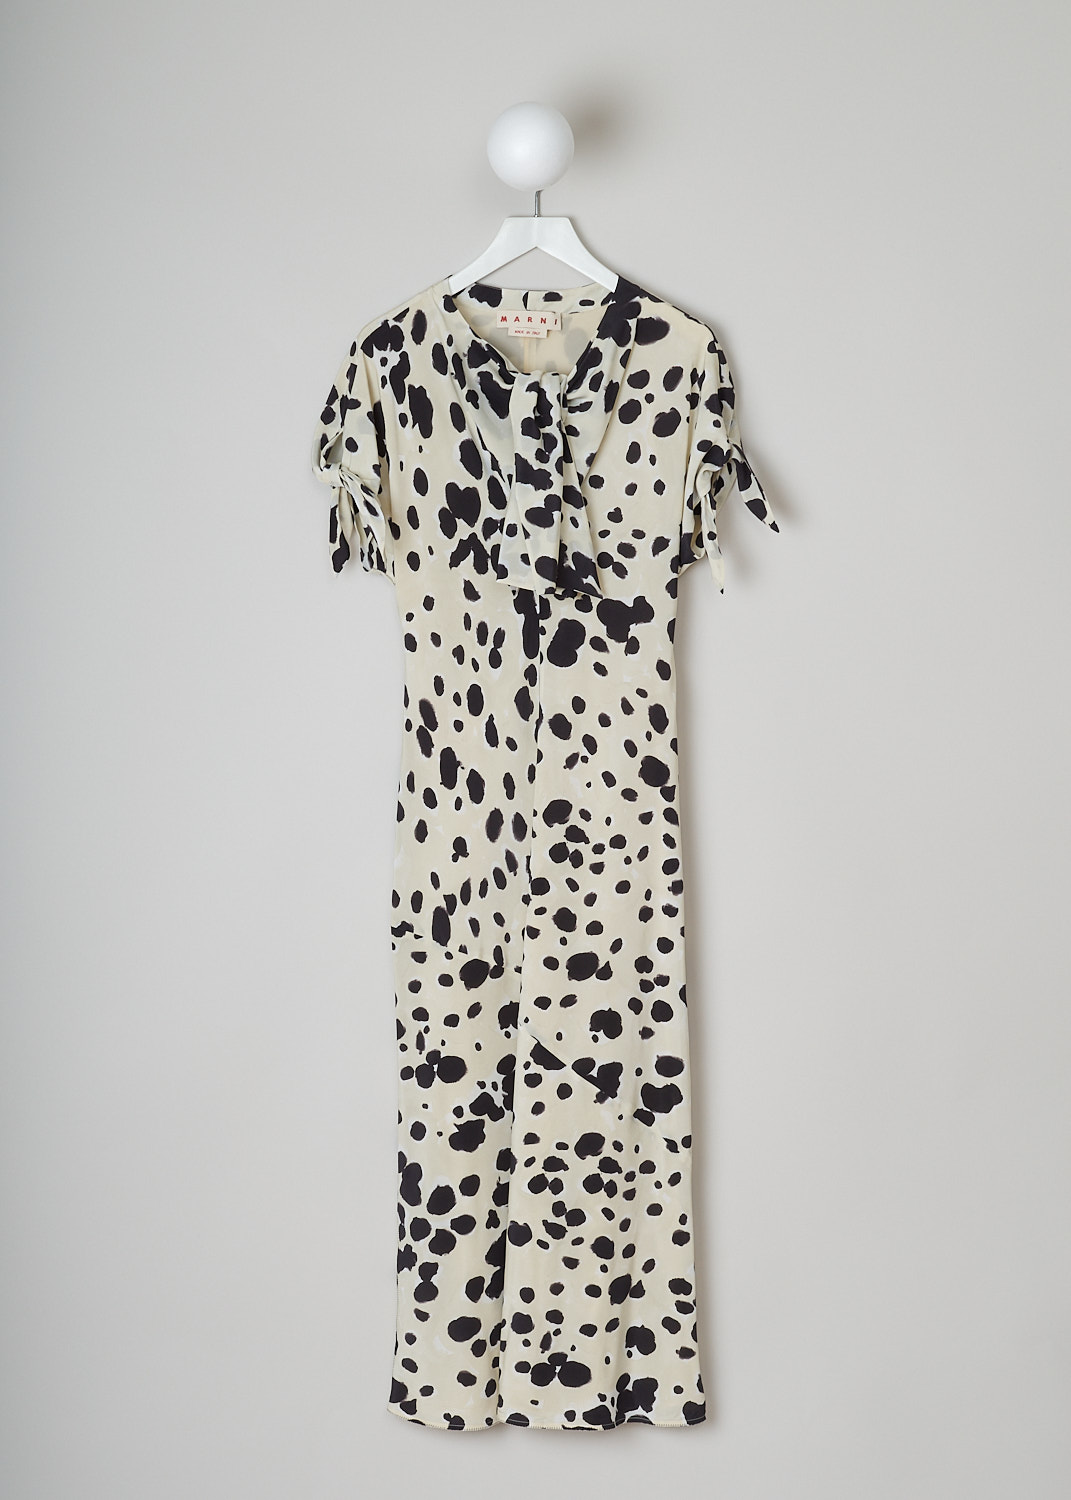 MARNI, POP DOTS SILK CRÊPE MAXI DRESS, ABMA0871U0_UTSF85_PDW13, White, Beige, Print, Front, This ivory silk crêpe maxi dress has an all-over pop dots print. The dress has a bow-tie neckline with a deep V. The short sleeves have tie cuffs. The long skirt flares out at the bottom. Zigzag stitching runs along the side seams and hem. The dress is fully lined.  
